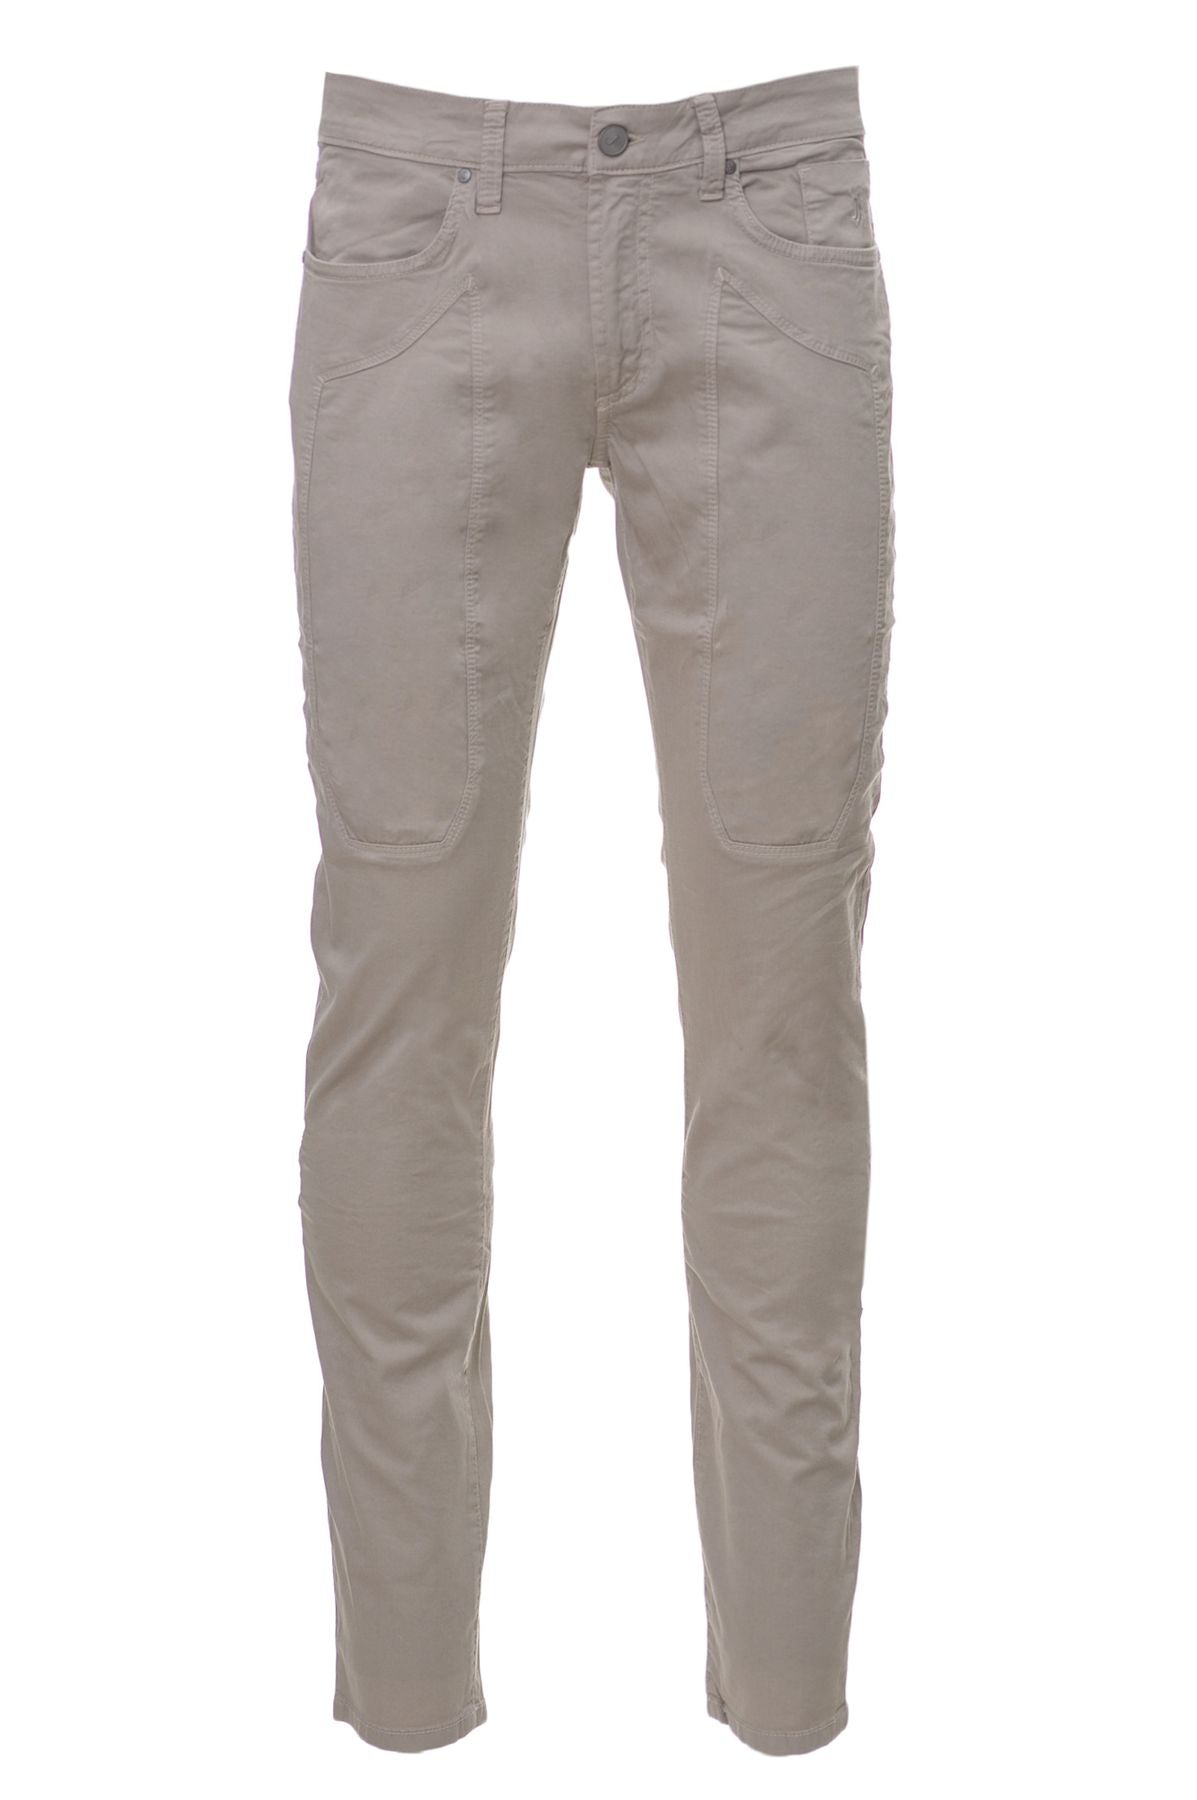 JECKERSON Spring/Summer Cotton Trousers